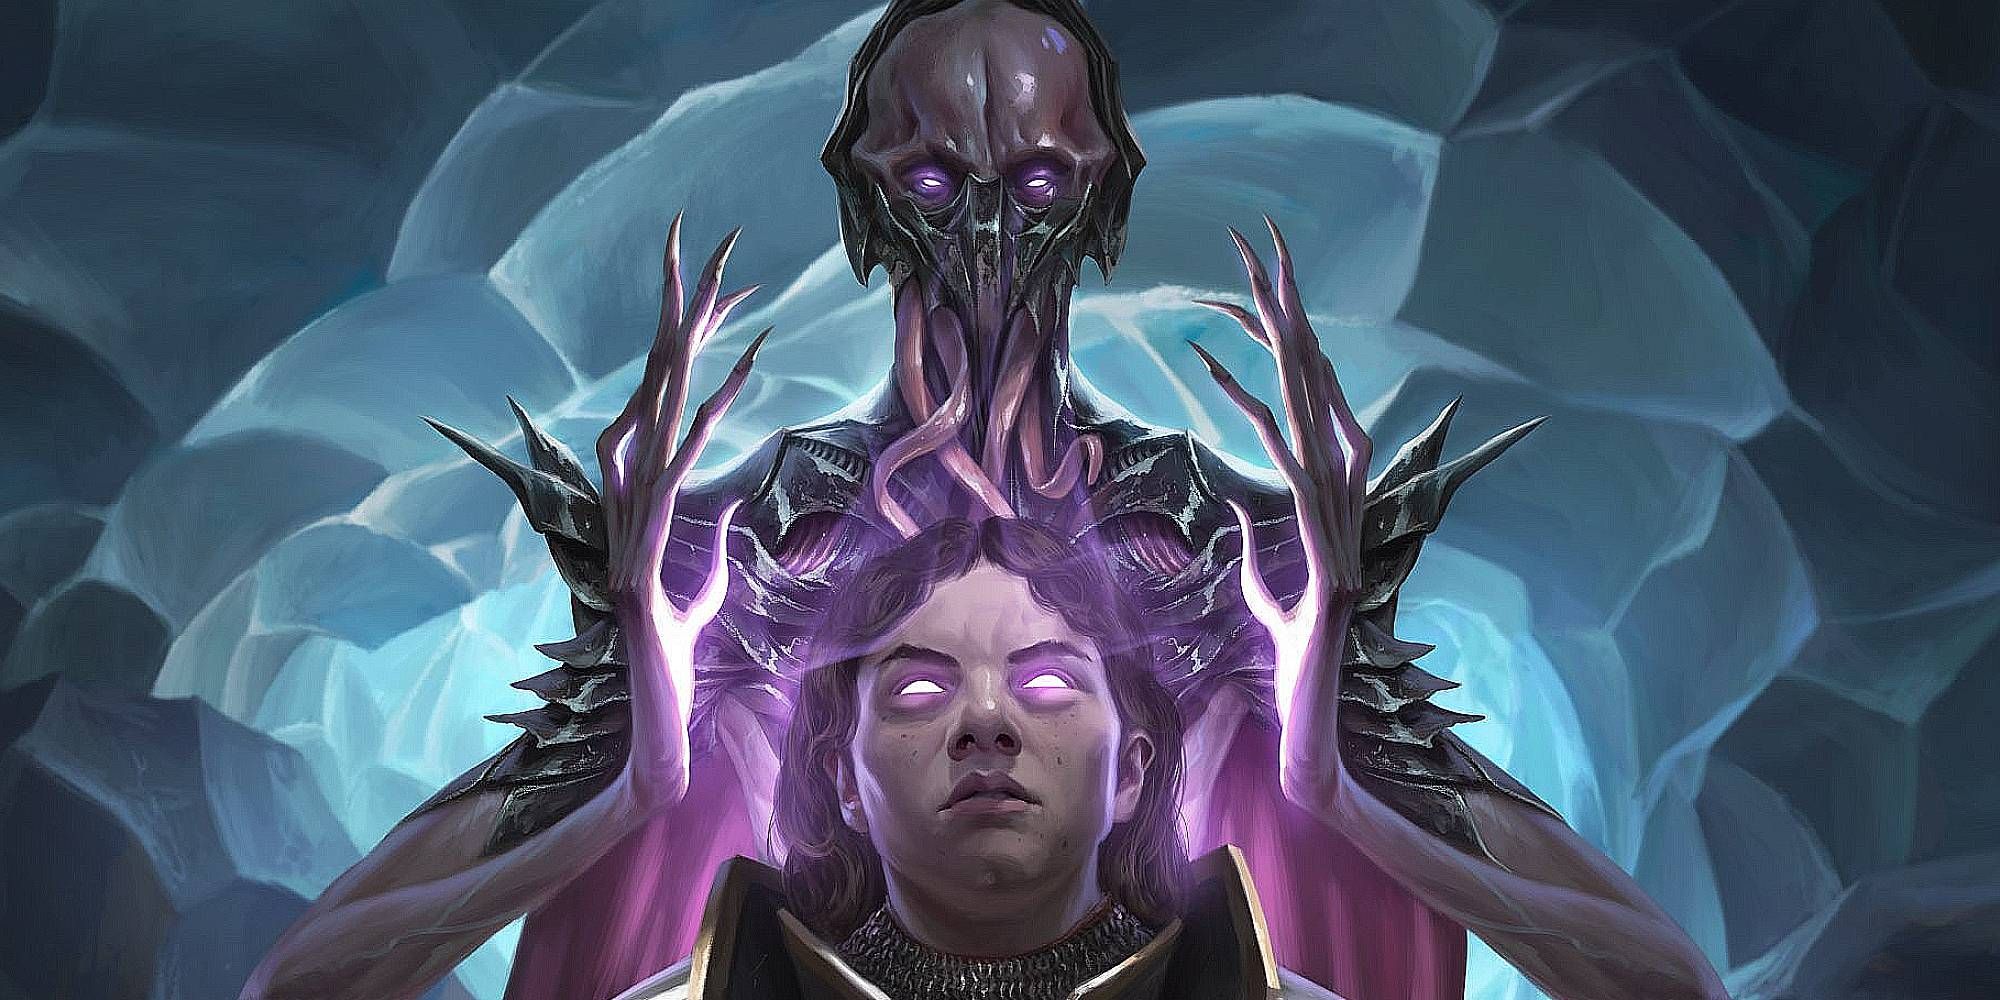 A mindflayer holds the head of a purple-eyed possessed humanoid between its hands